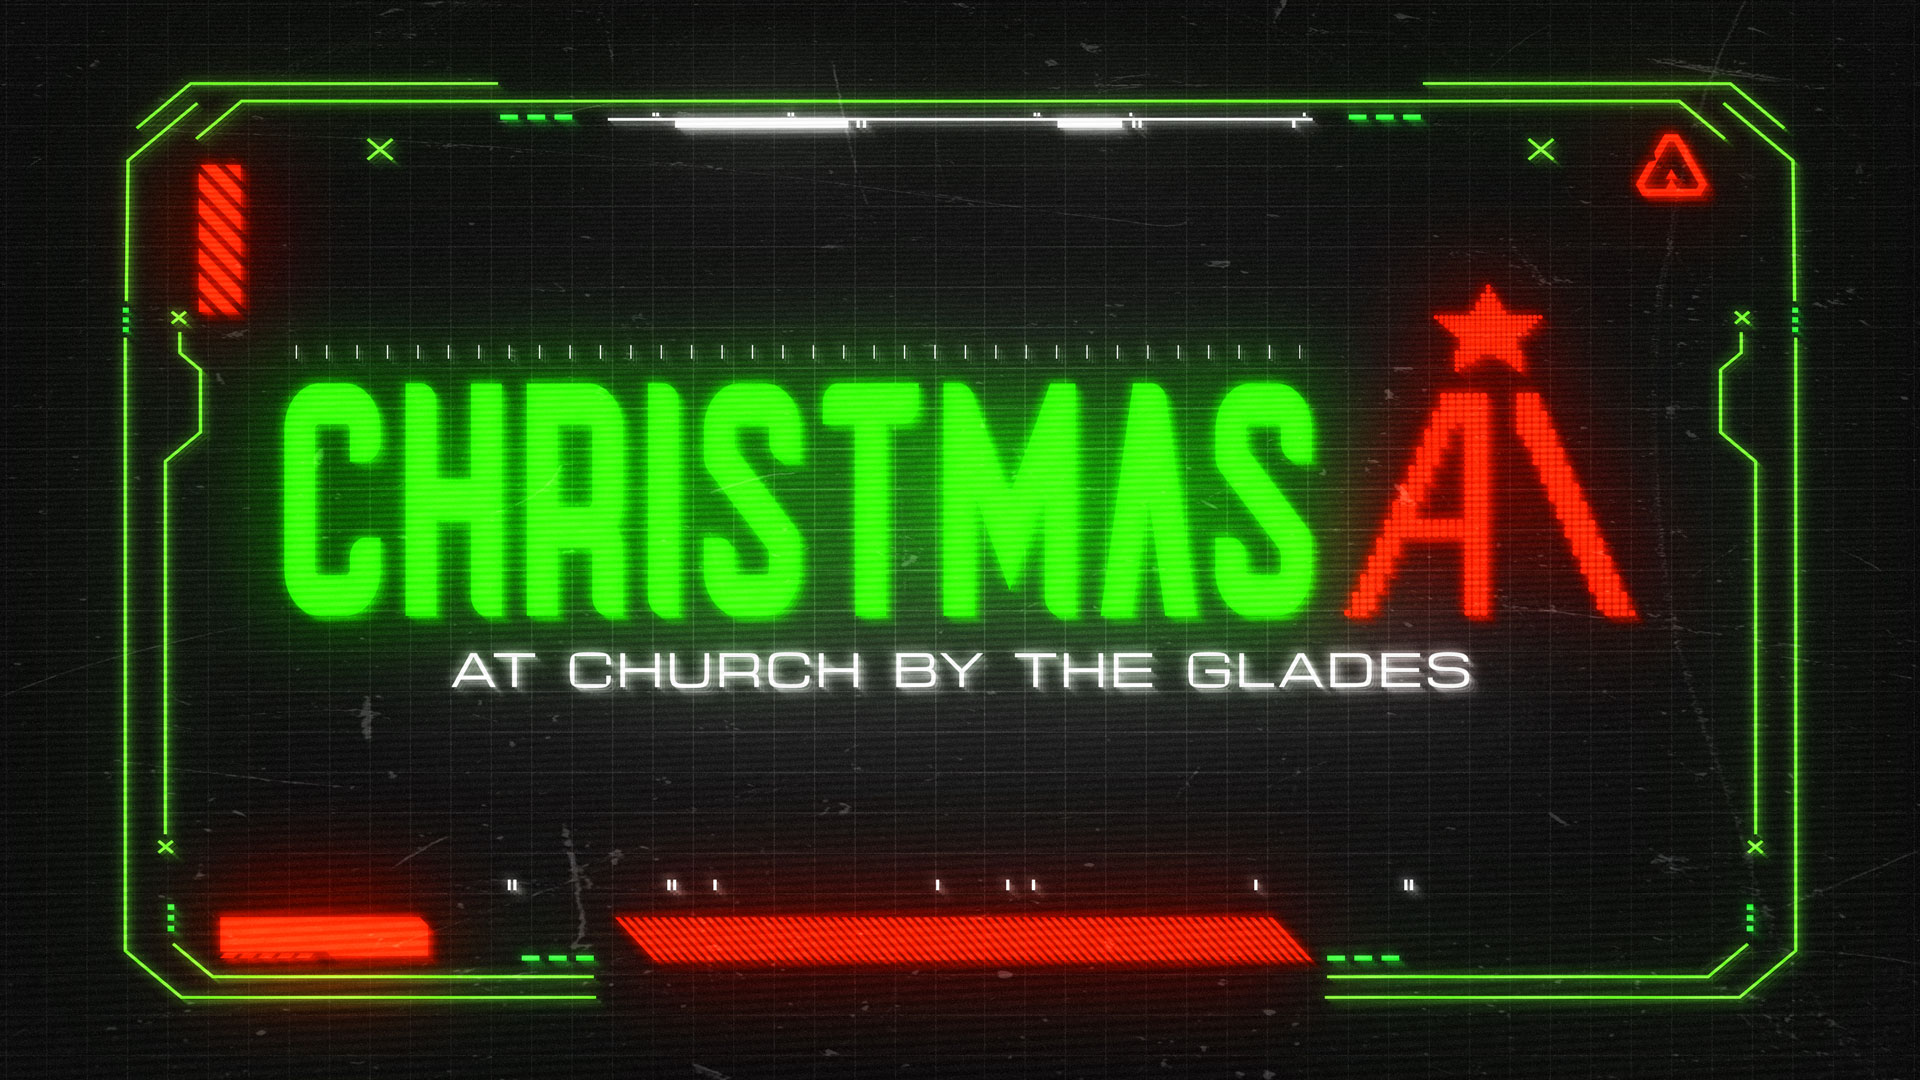  Christmas at Church by the Glades